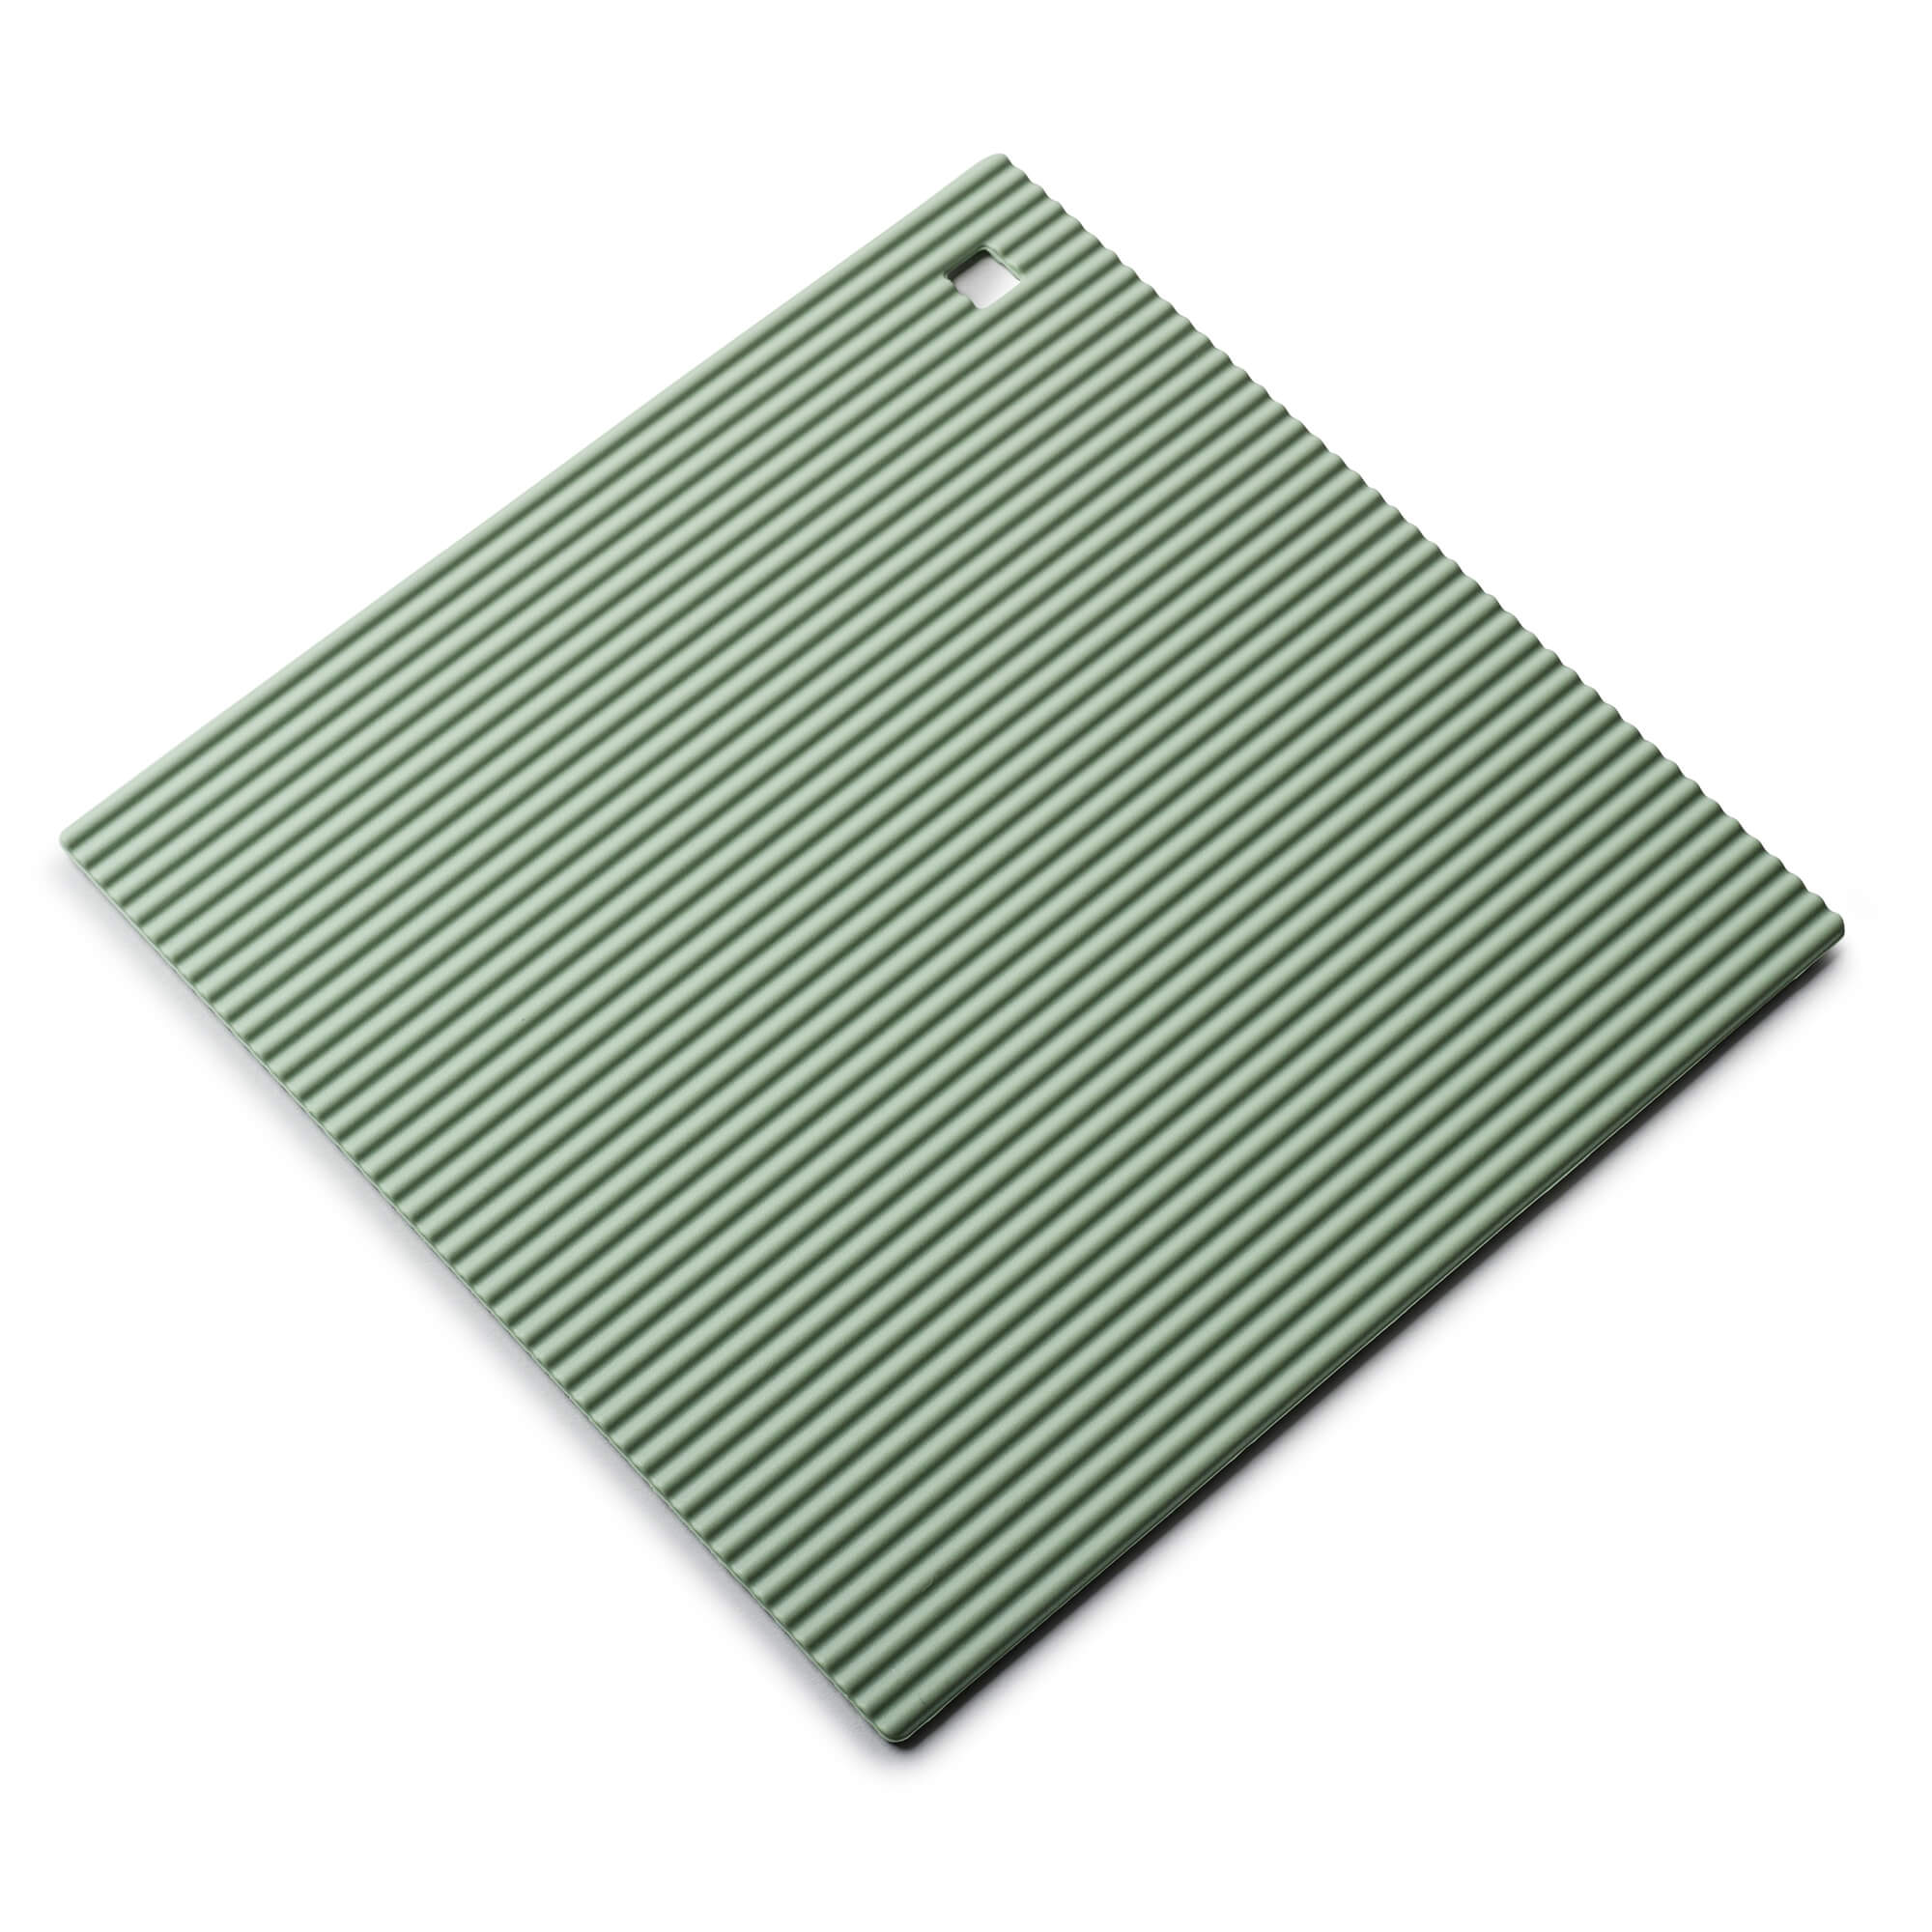 Zeal Silicone Hot Mat in Sage Green